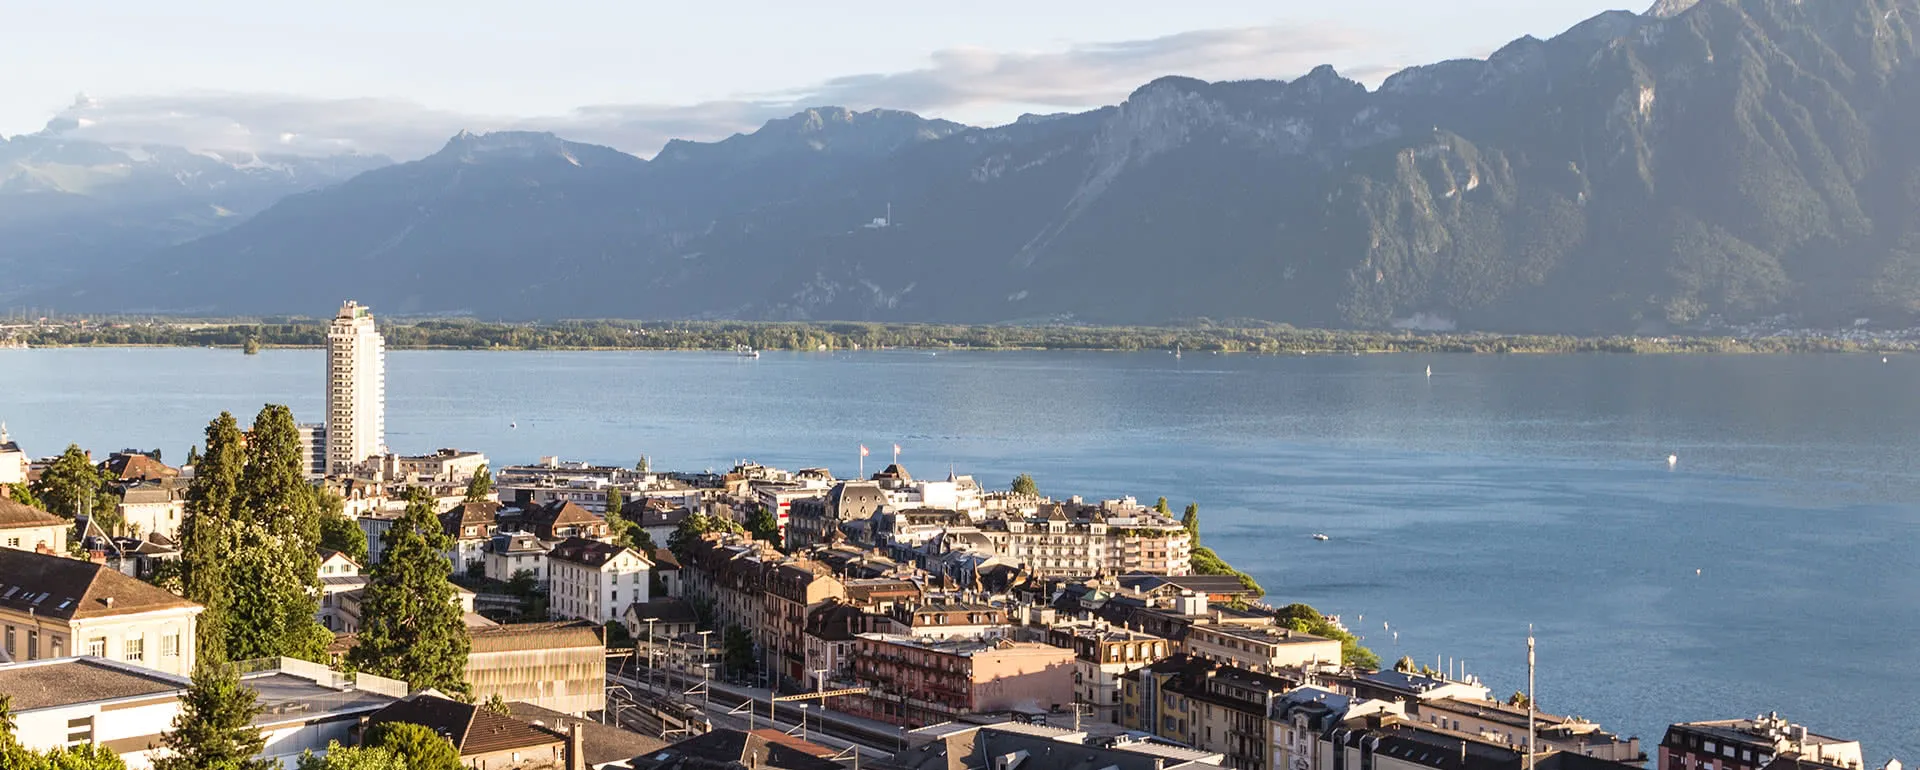 Meeting and conference location Montreux